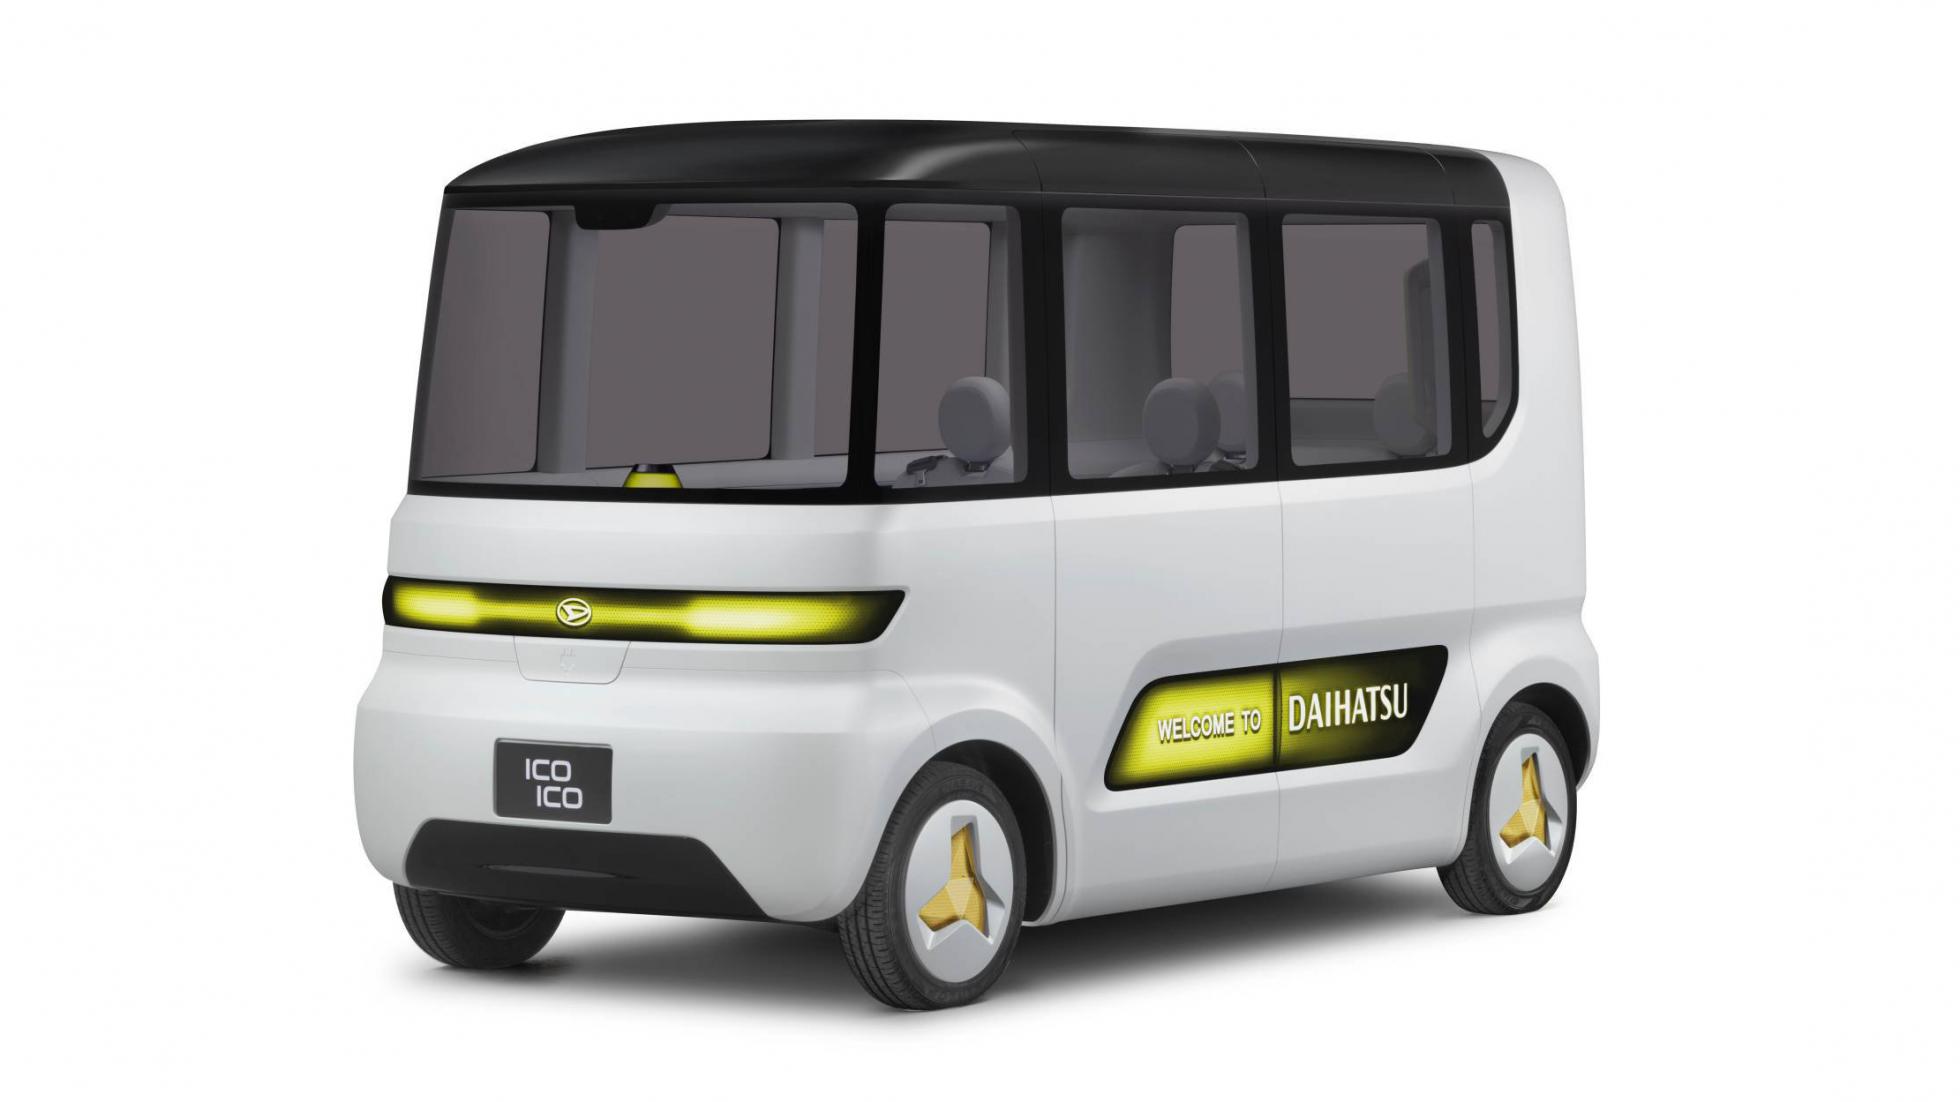 Rejoice! Daihatsu has gone fully bonkers for the Tokyo show